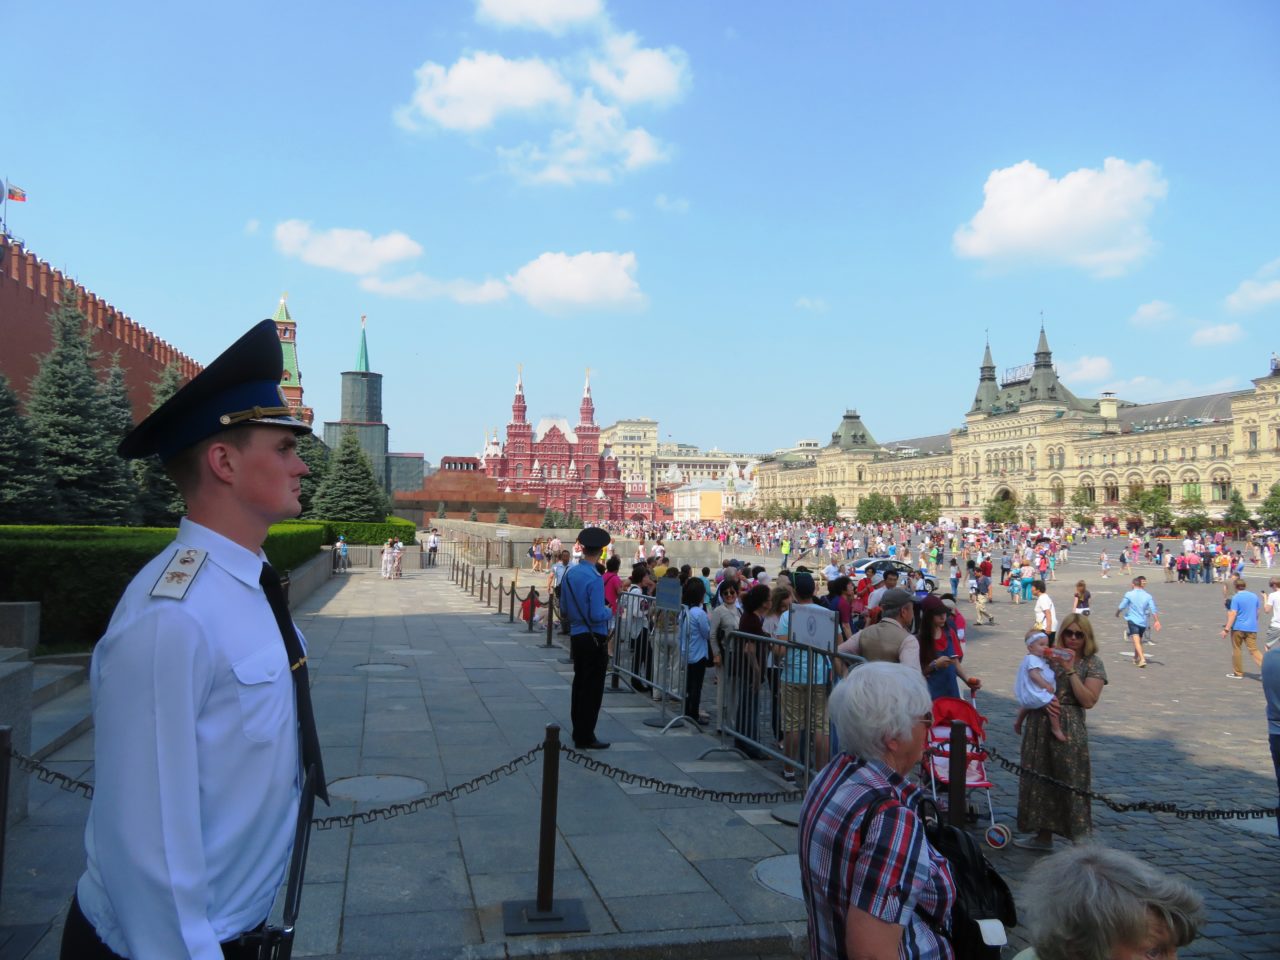 Moscow: Now a World-Class Destination ~ Red Square and the Walls of the Kremlin, Lemin's Mausoleum, State History Museum of Russia and GUM department store